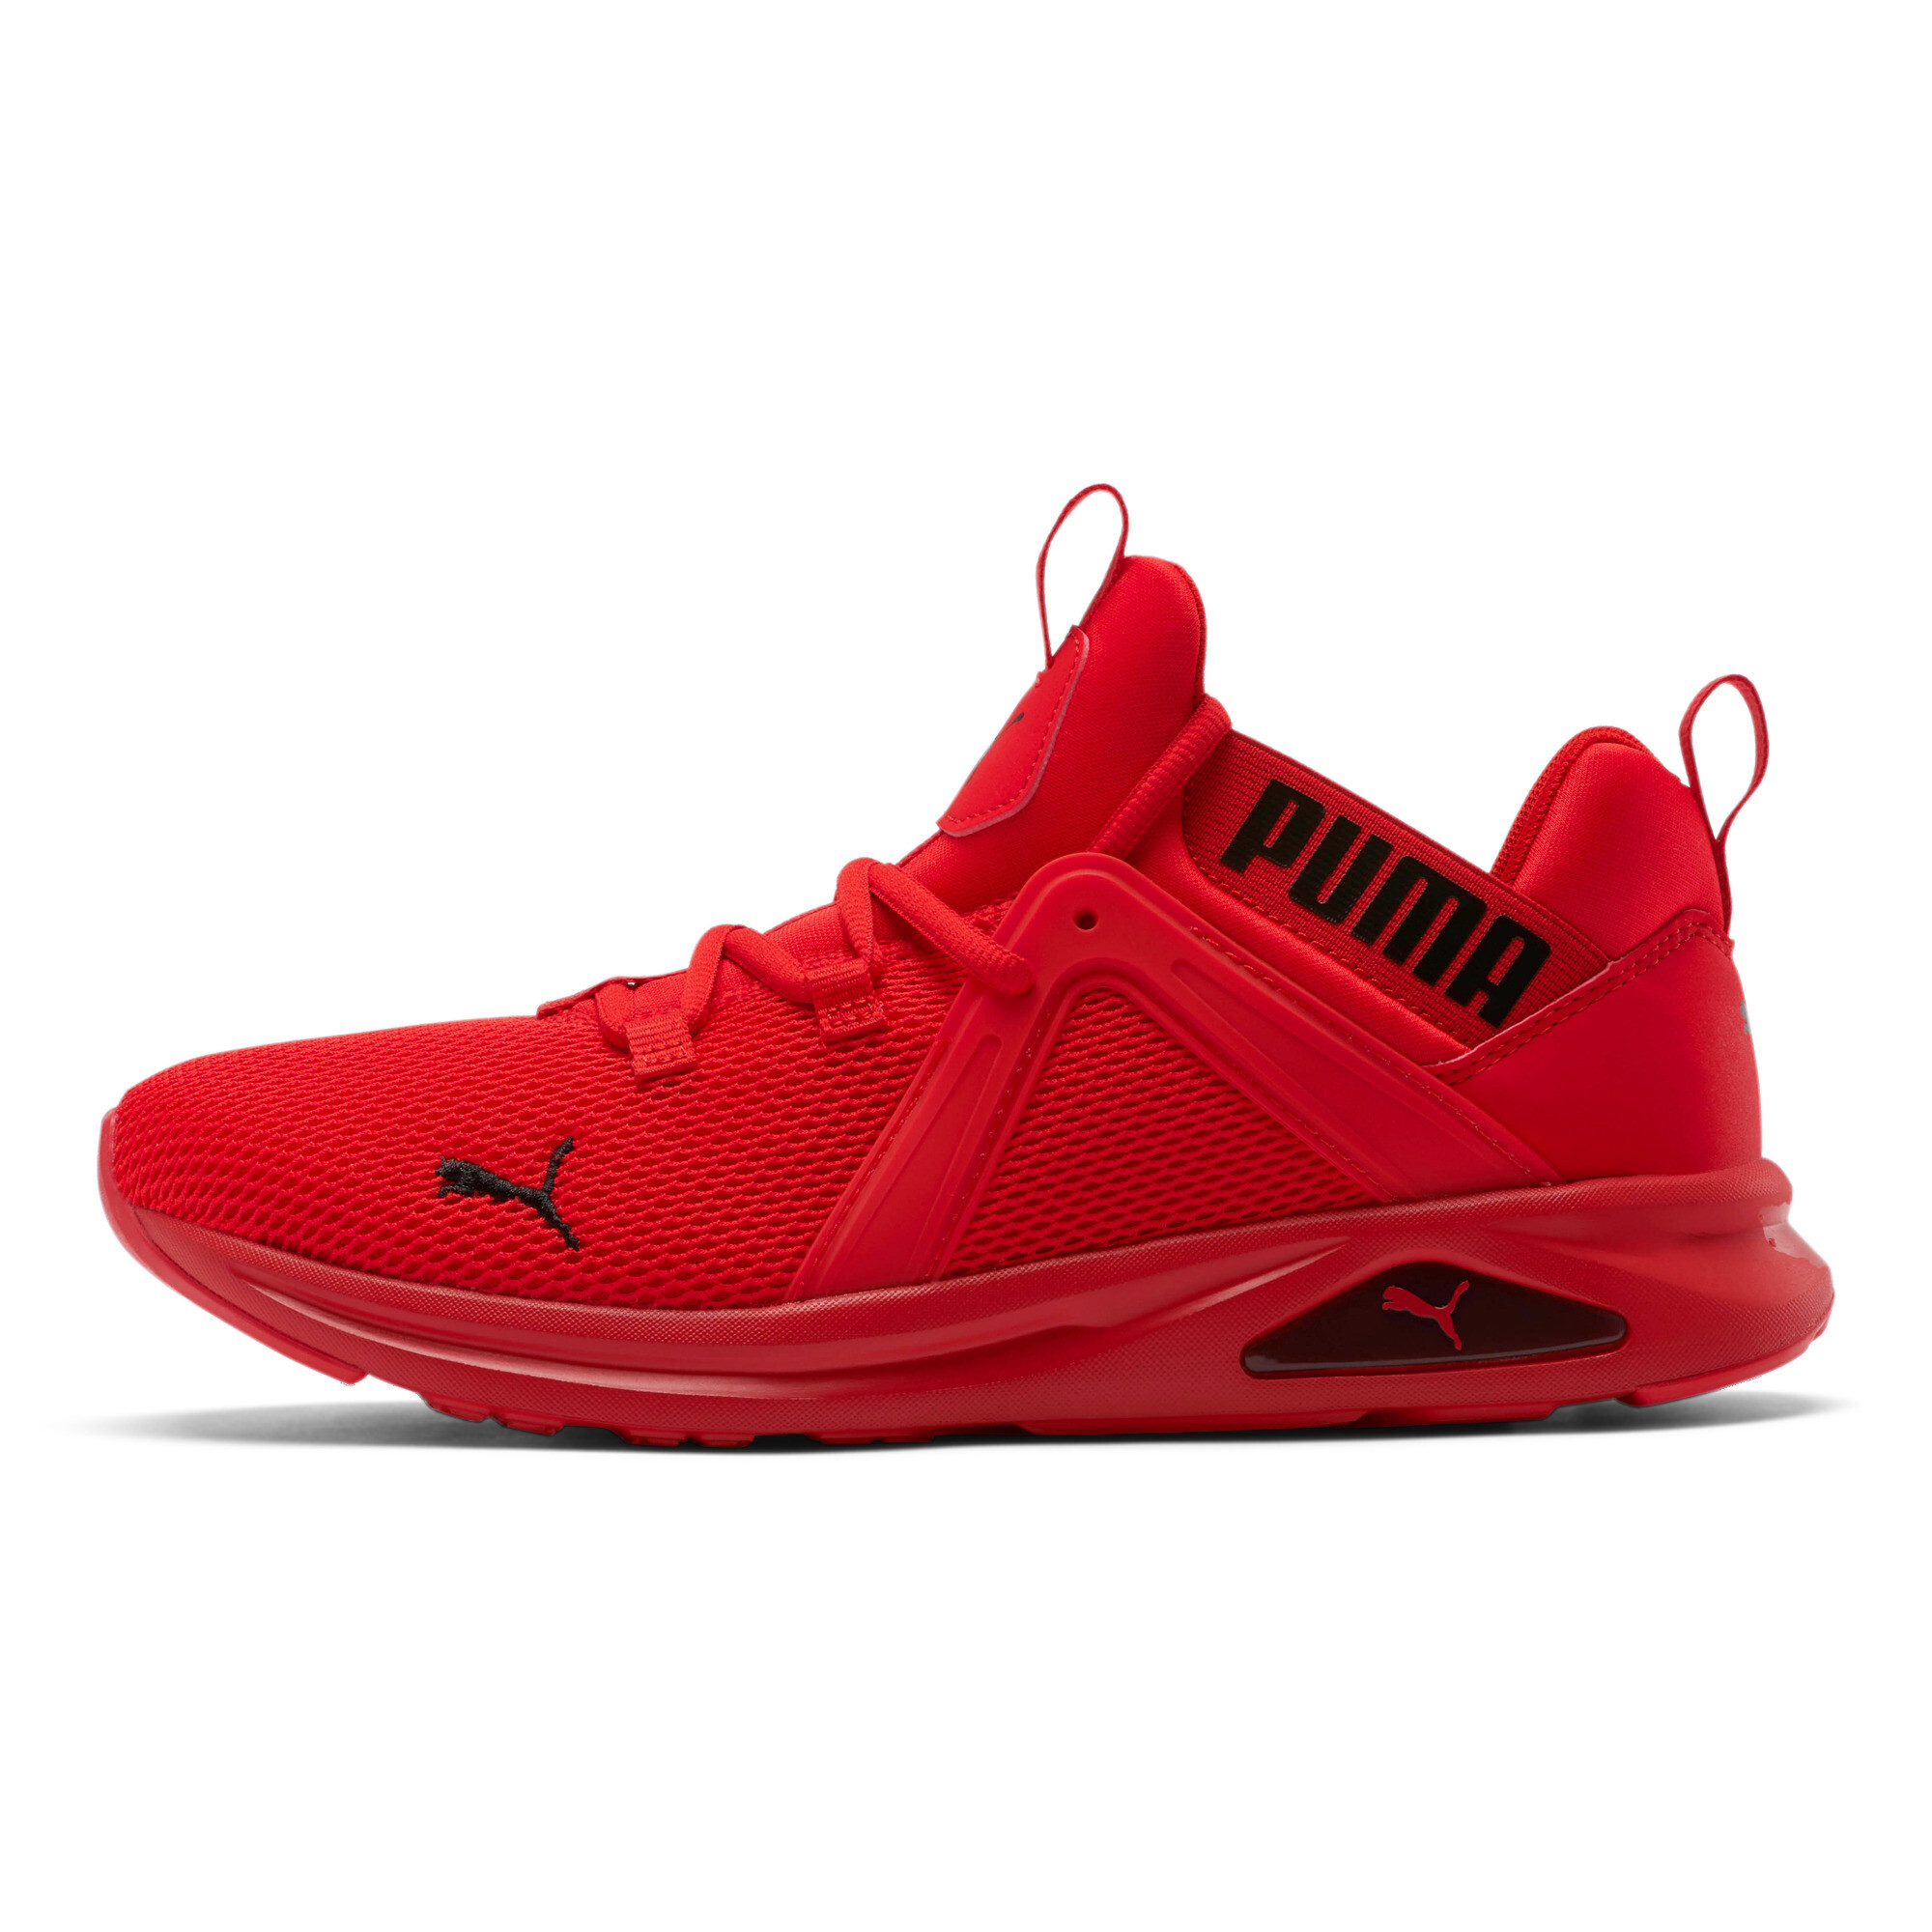 puma latest shoes with price